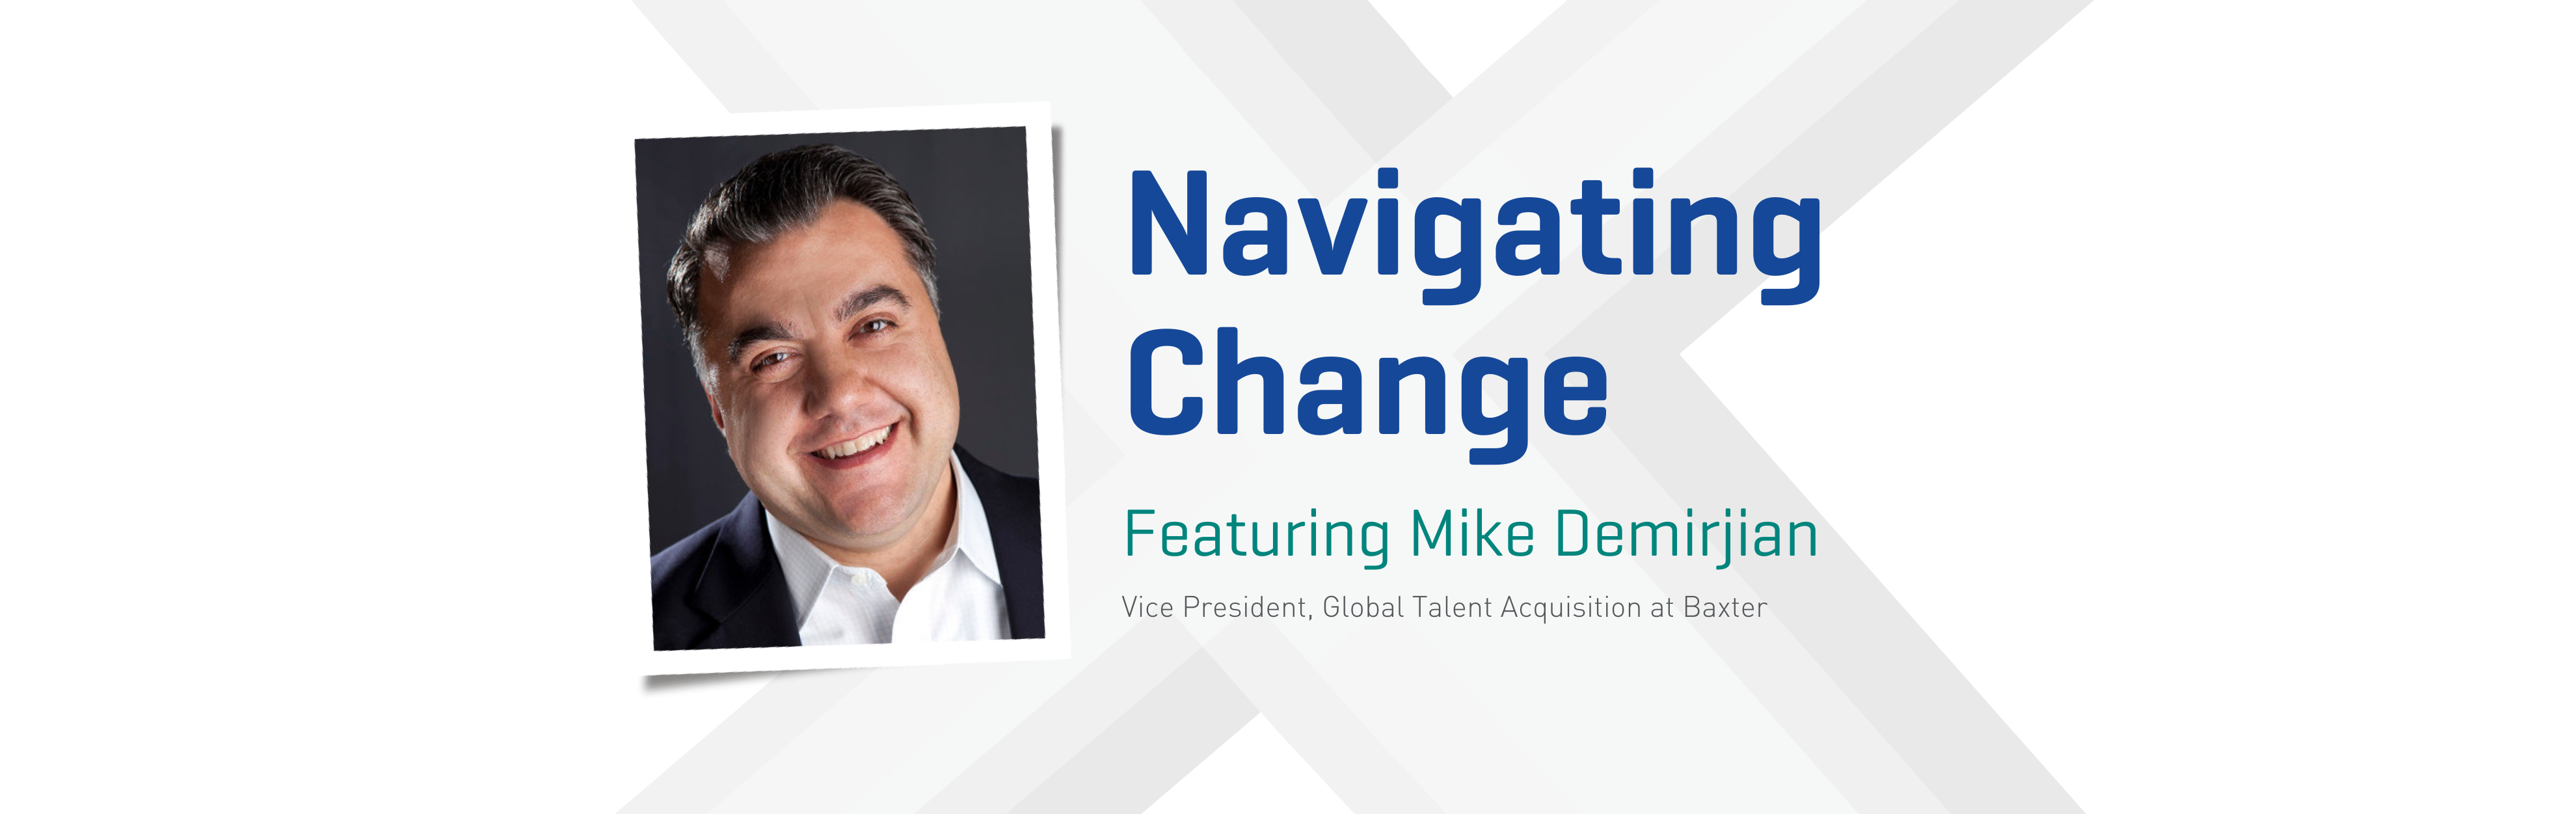 Banner image of Global Vice President of Talent Acquisition, Mike Demirjian